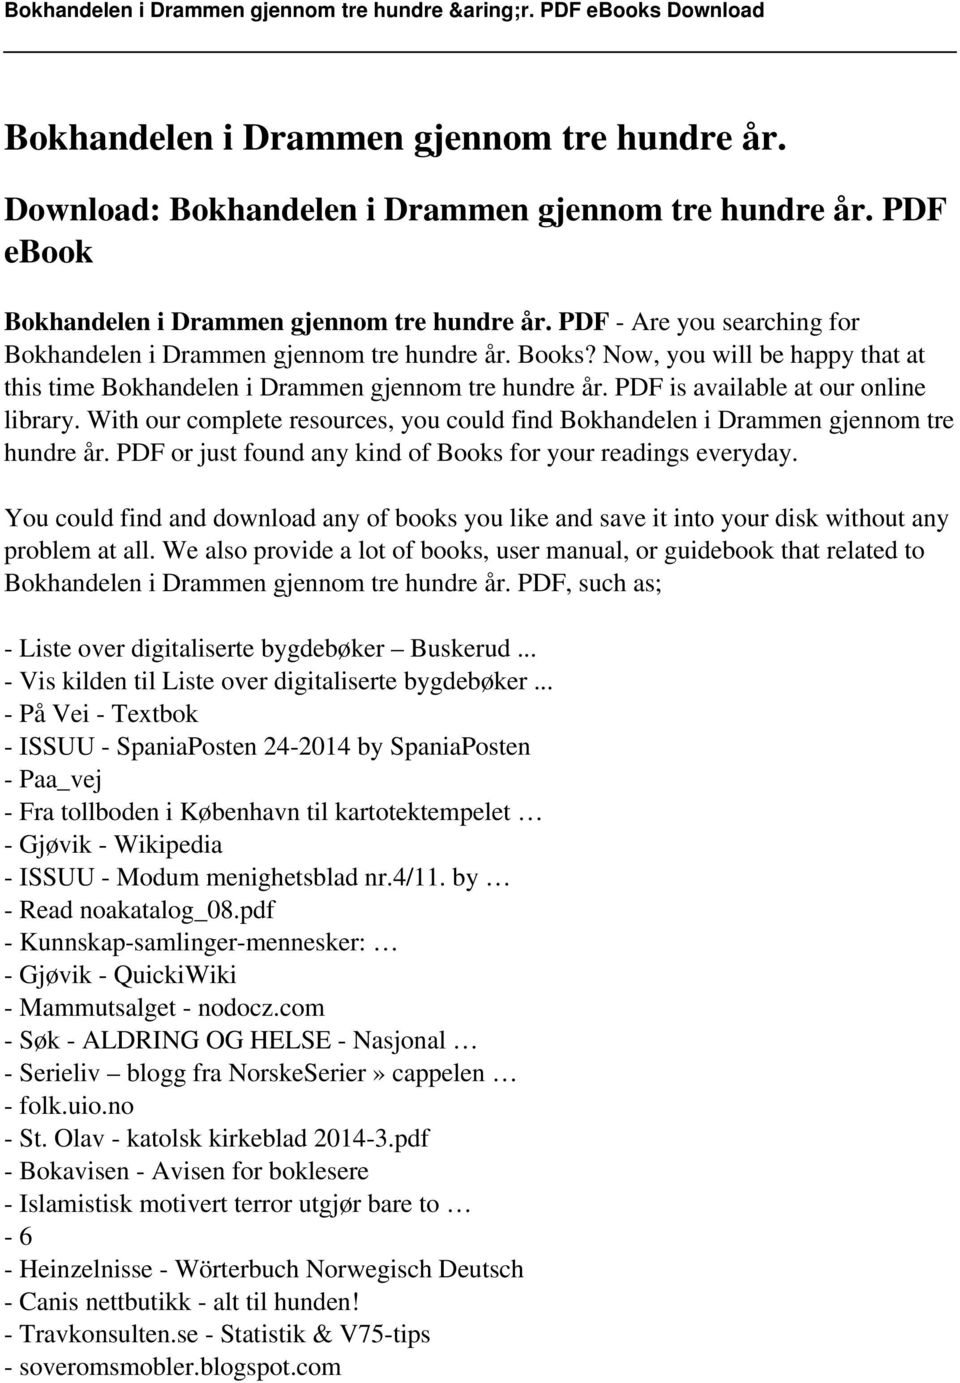 PDF is available at our online library. With our complete resources, you could find Bokhandelen i Drammen gjennom tre hundre år. PDF or just found any kind of Books for your readings everyday.